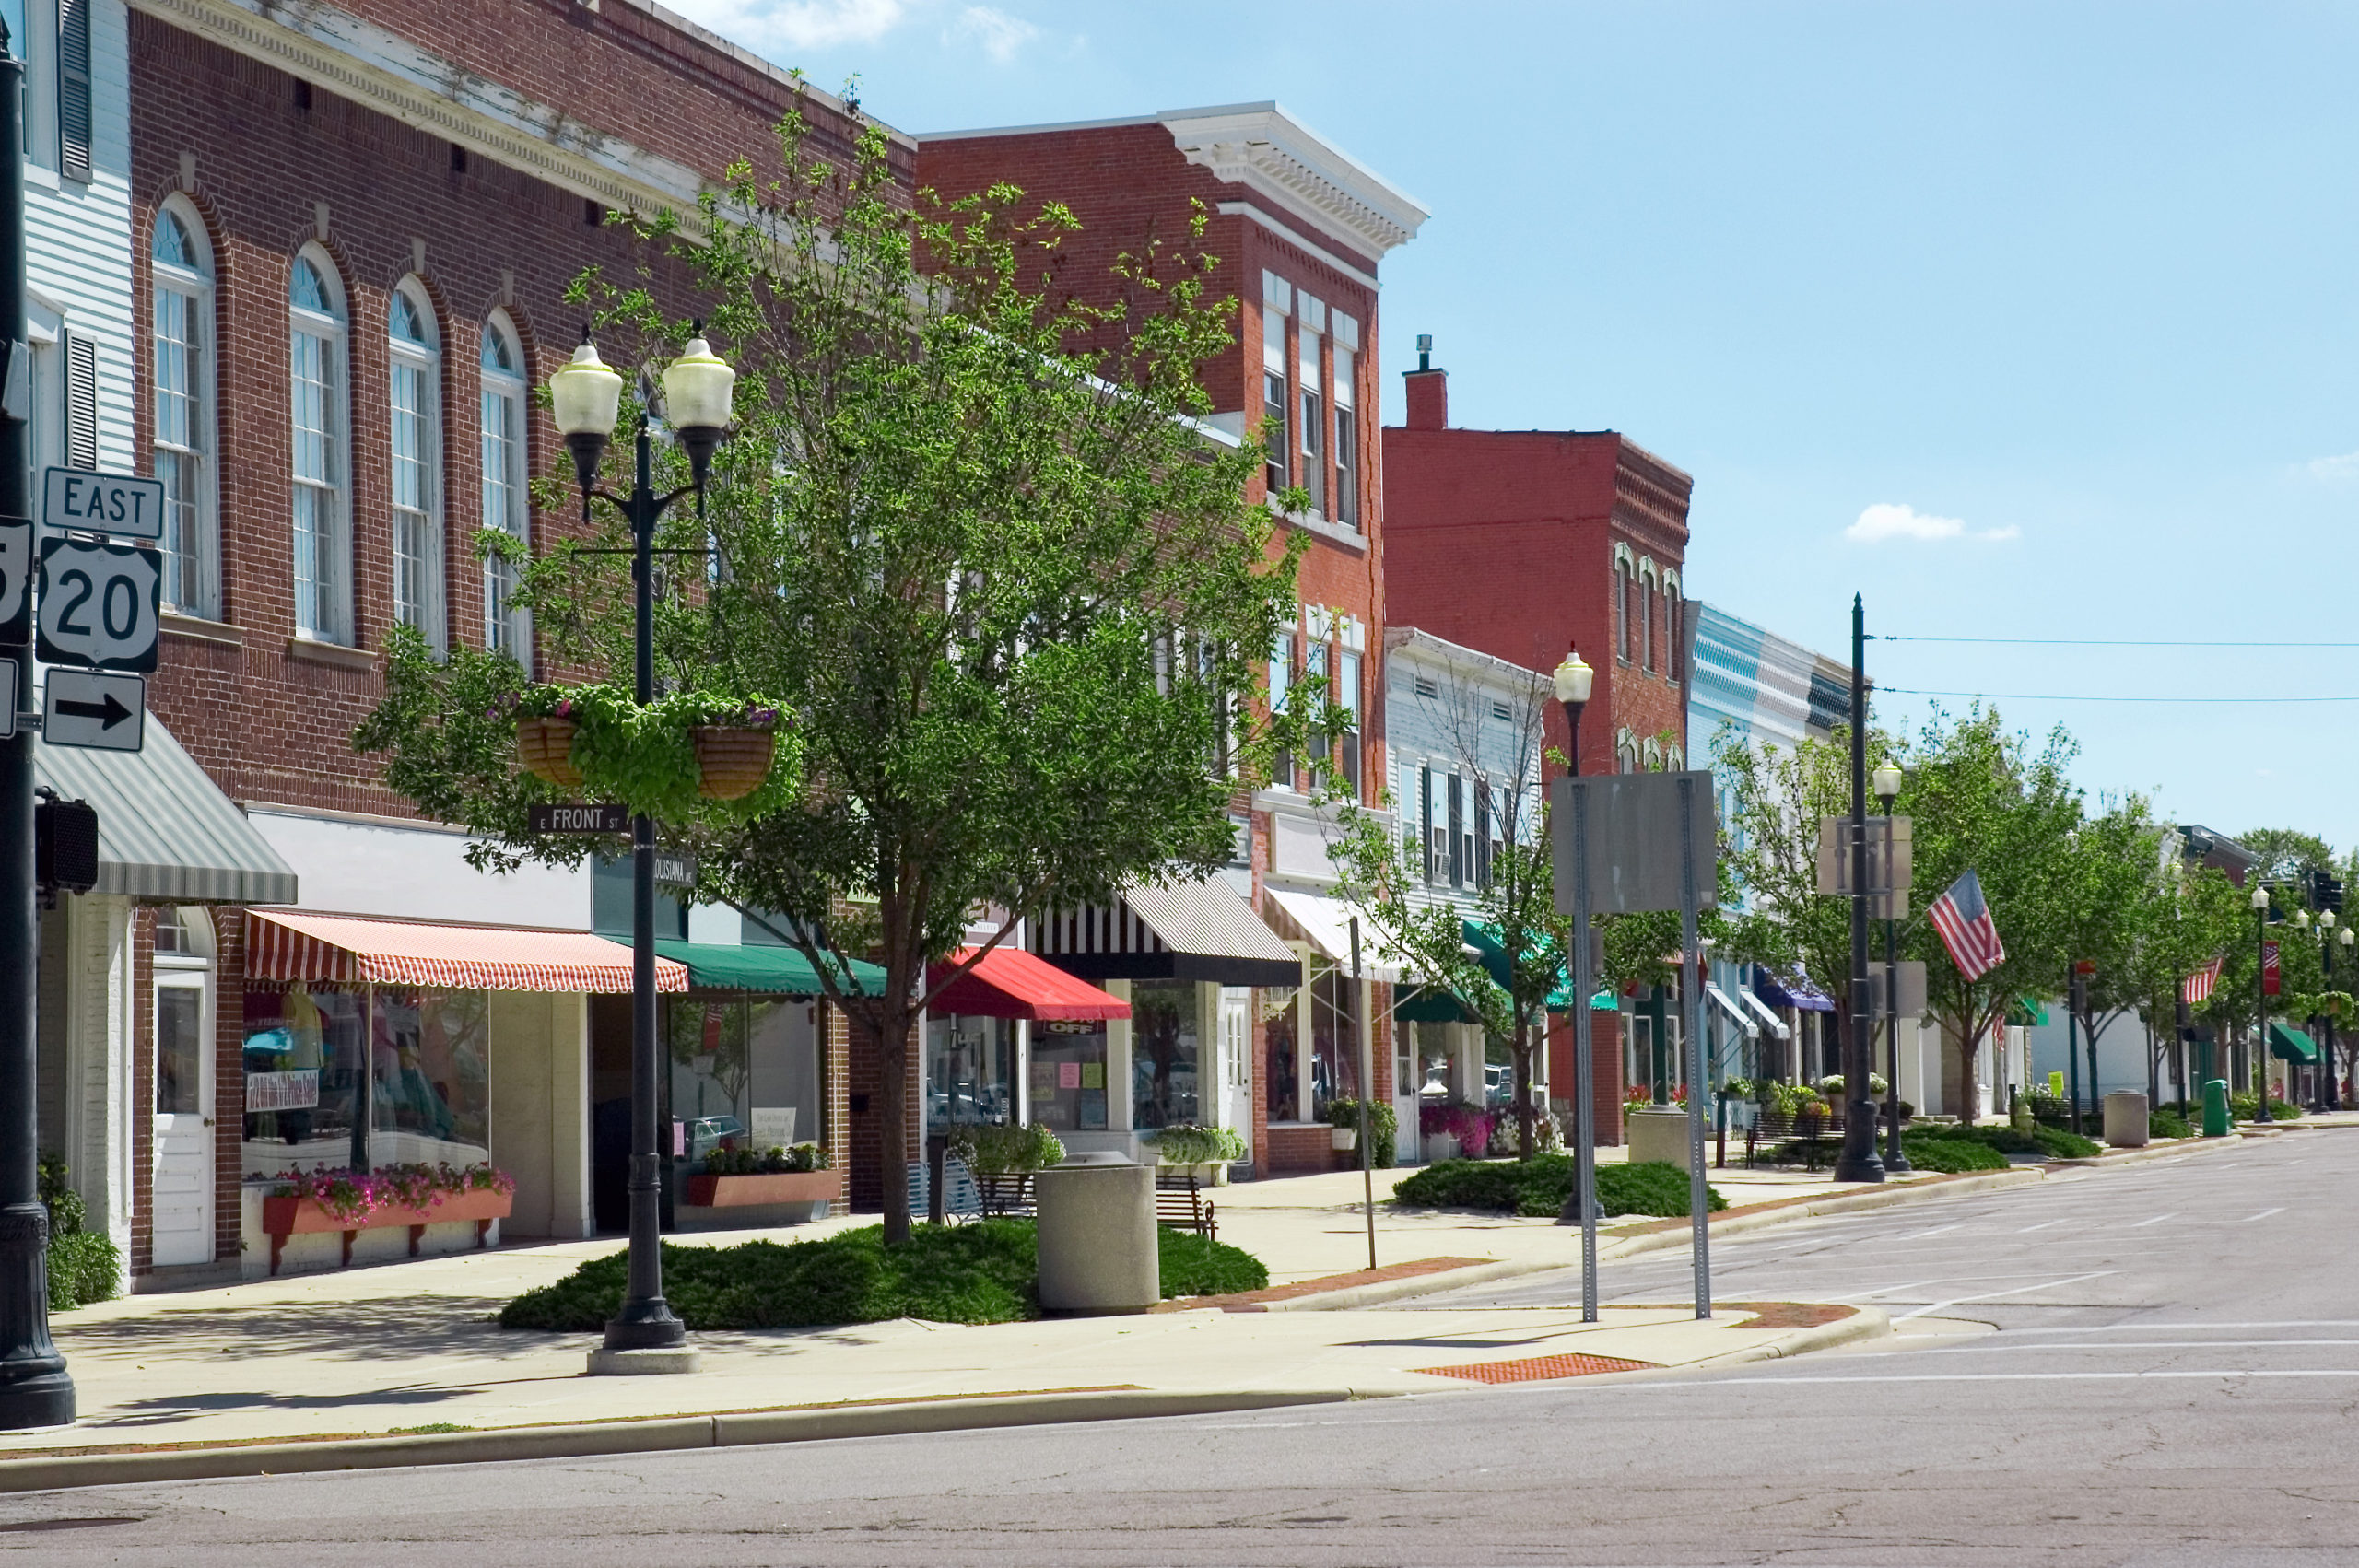 Photo of the main street in a typical midwest small town, with U.S. flags outside of several buildings.